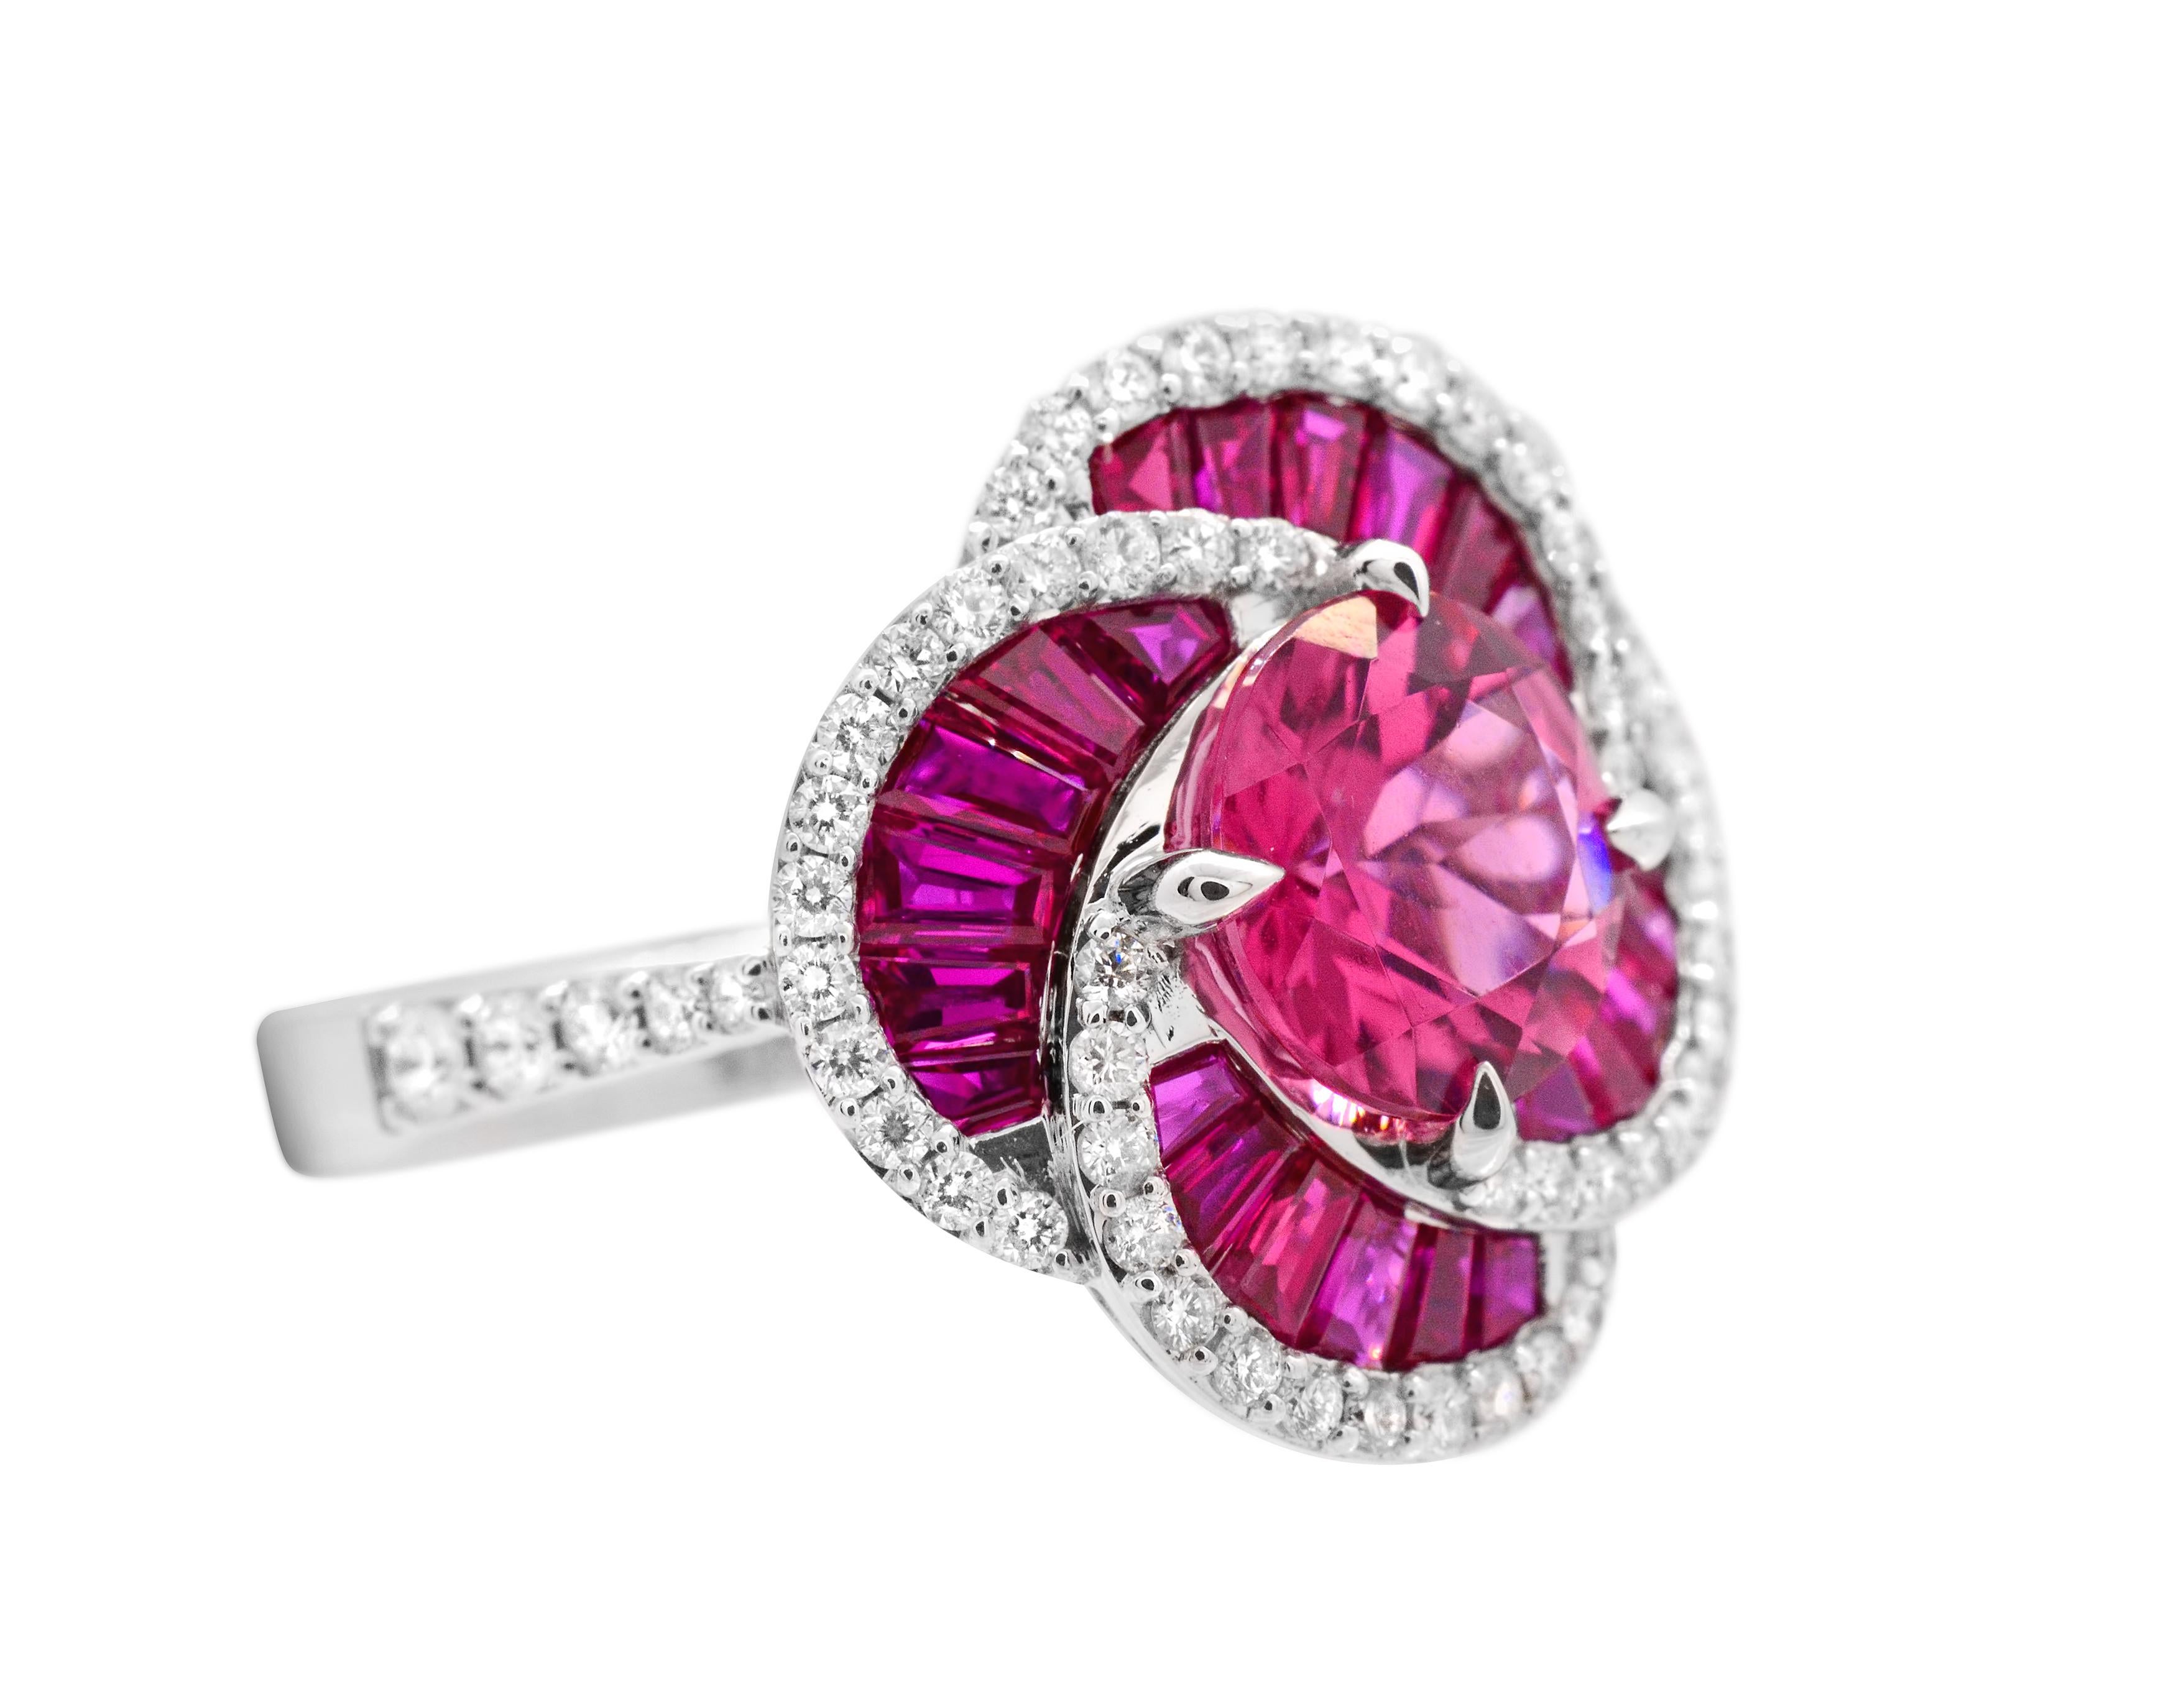 Exceptional colors in a unique silhouette.

A well saturated 1.73 carat pink tourmaline sits at the center of this 14Karat white gold cocktail ring, with encircling tapered baguette rubies that are equally as vibrant.  More than a 0.50 carat of